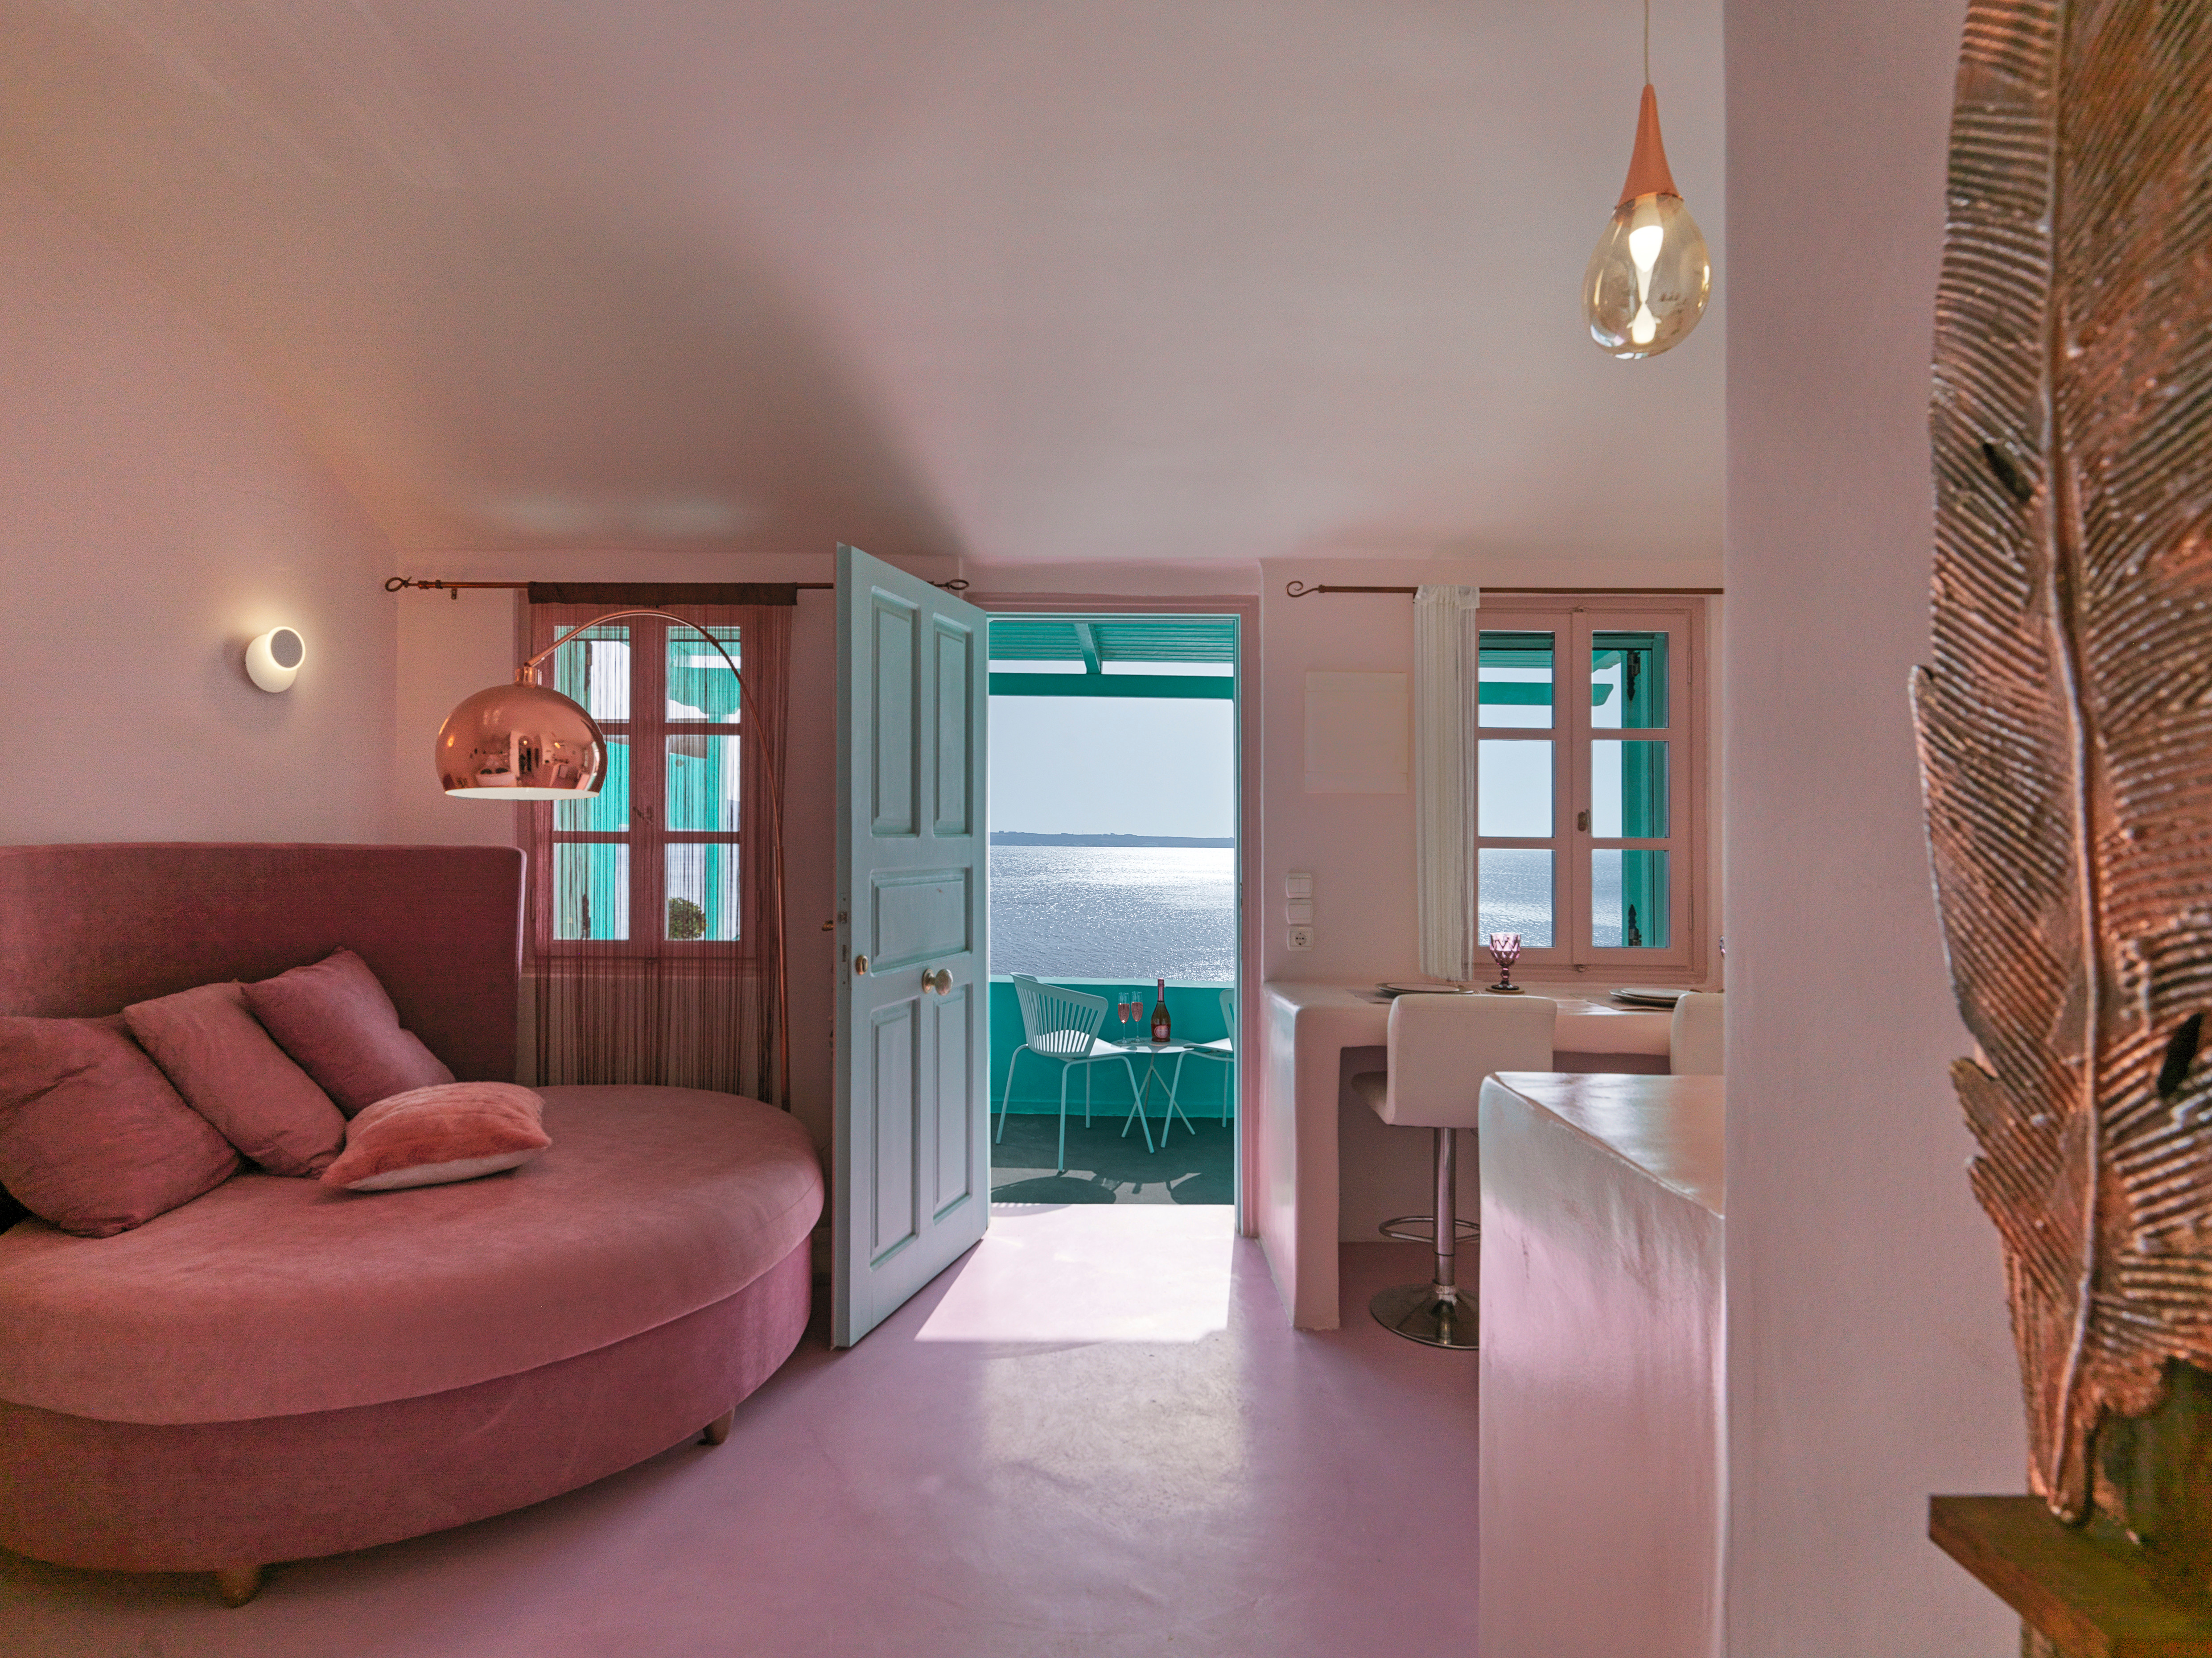 wes anderson asteroid city inspired airbnbs secret suite